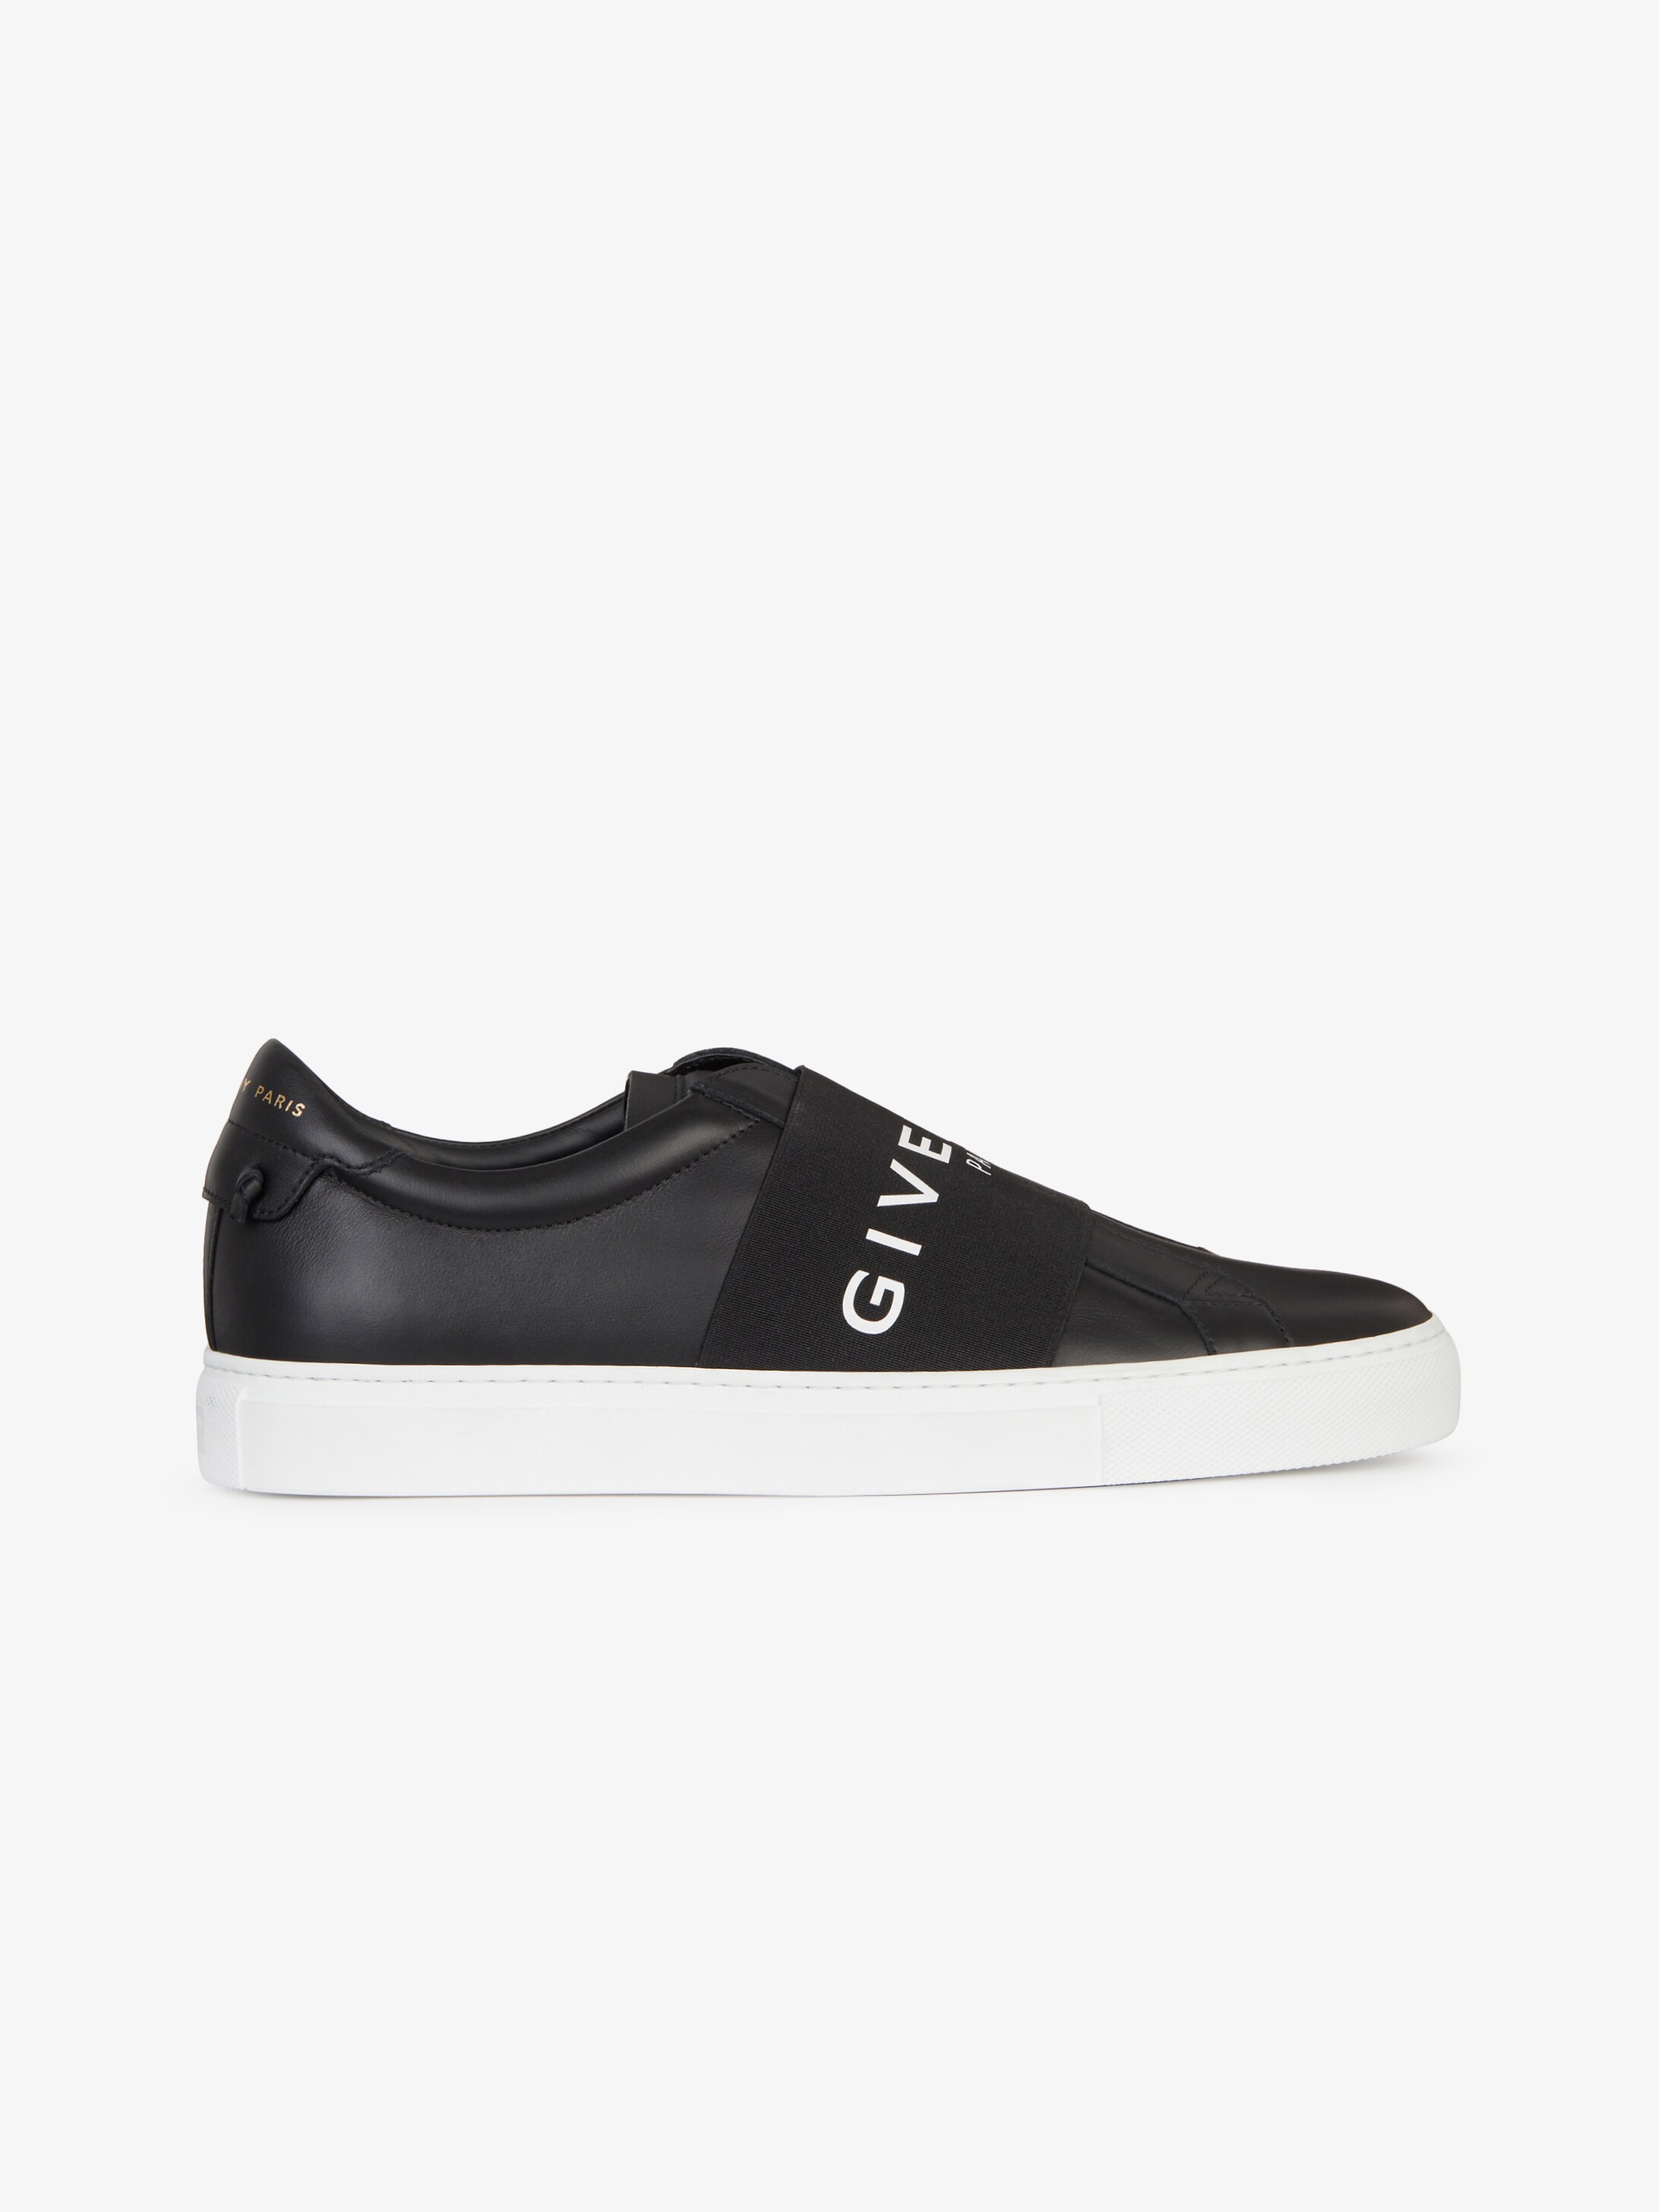 givenchy leather sneakers